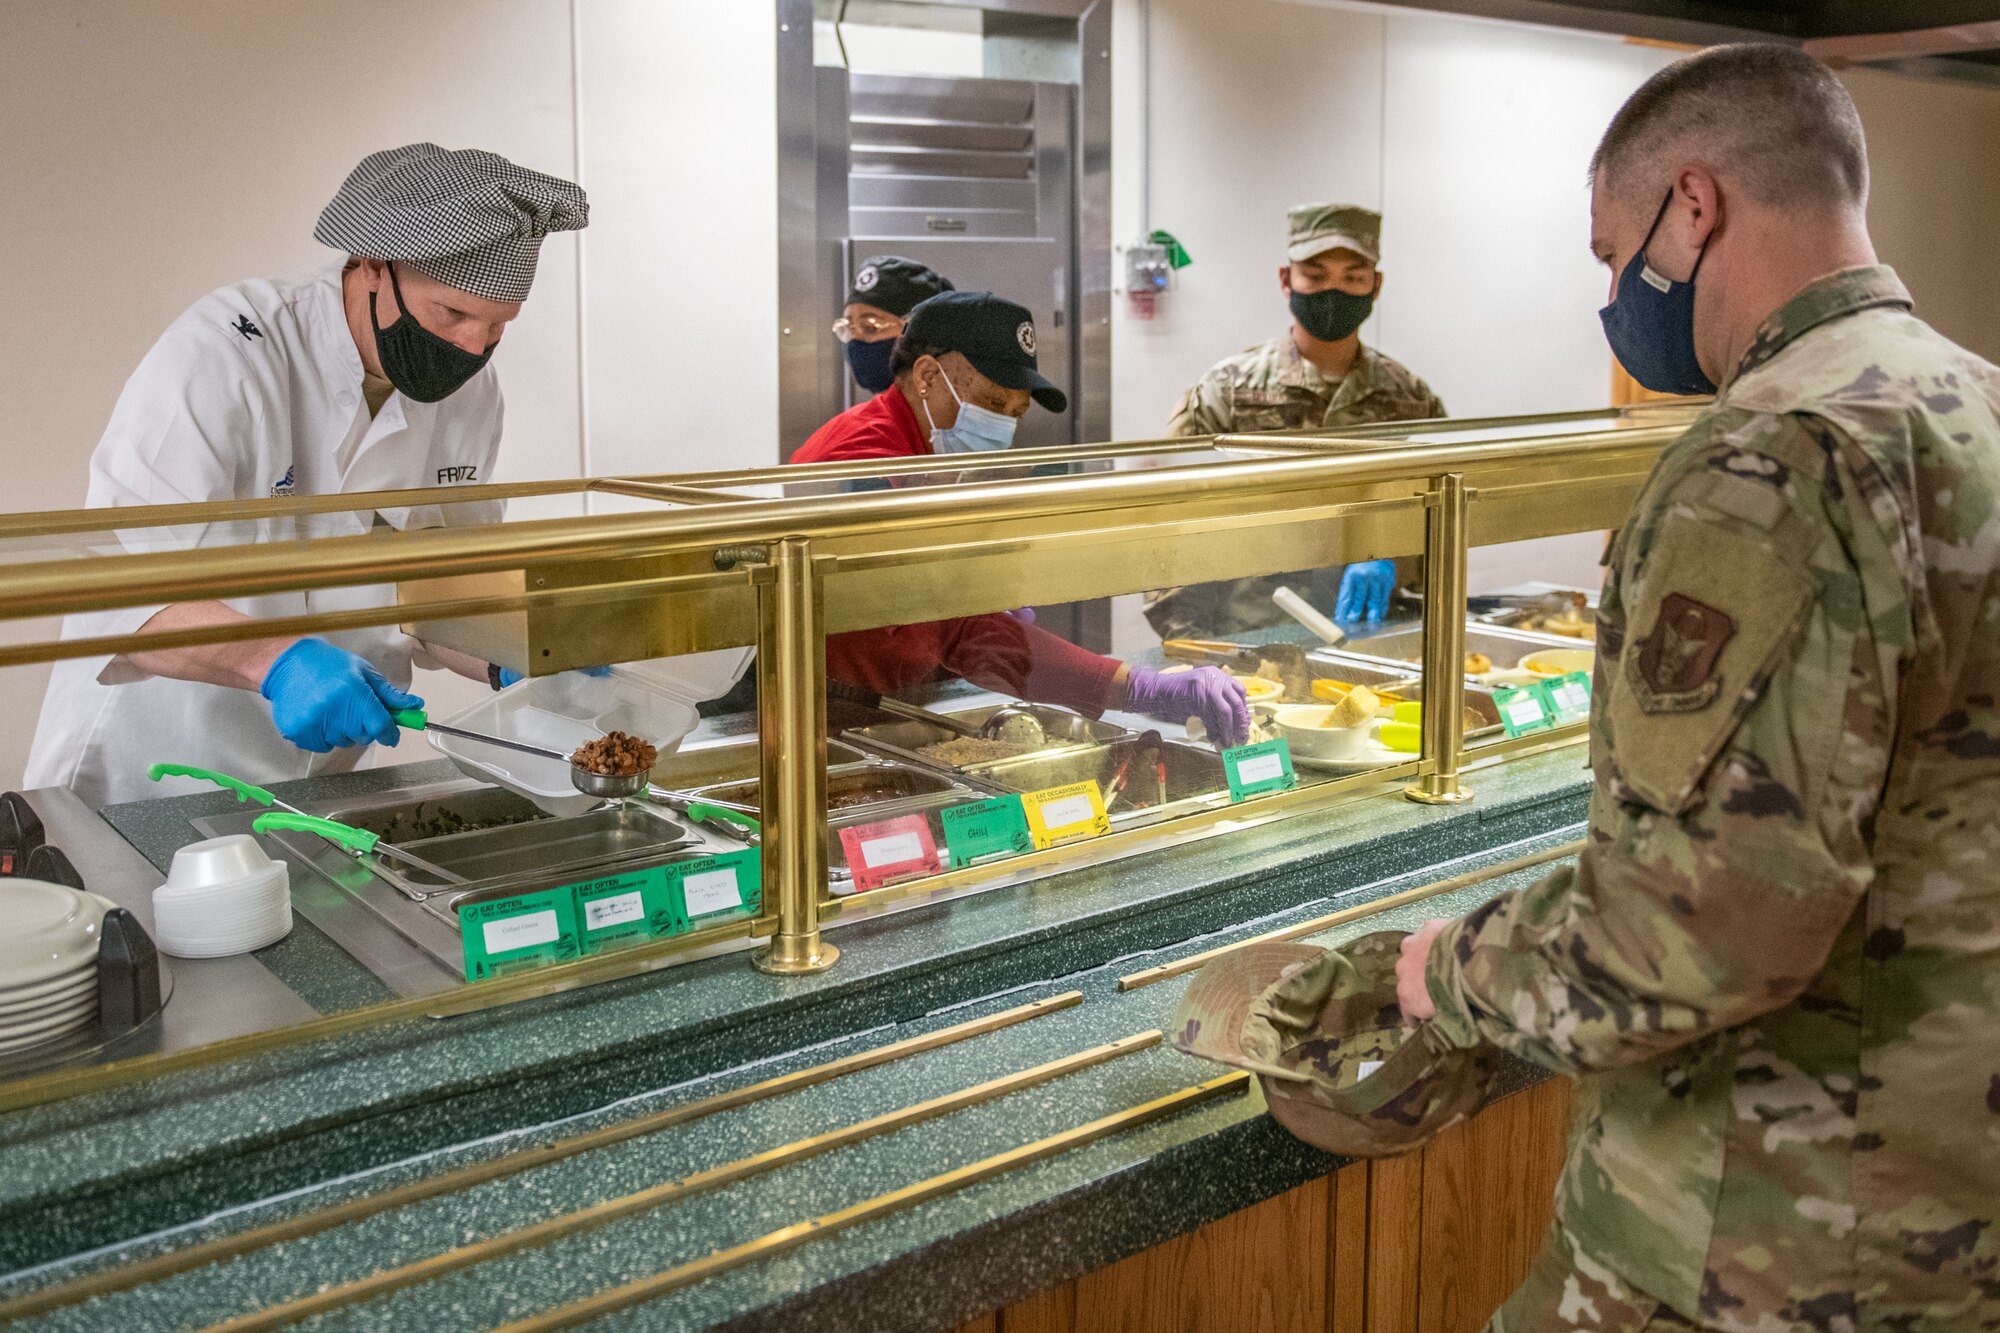 Col. Matthew Fritz, commander of the 419th Fighter Wing, serves lunch to Master Sgt. Aaron Jones, 419th Fighter Wing historian, while volunteering at the Hillcrest Dining Facility Feb. 6, 2021, at Hill Air Force Base, Utah.